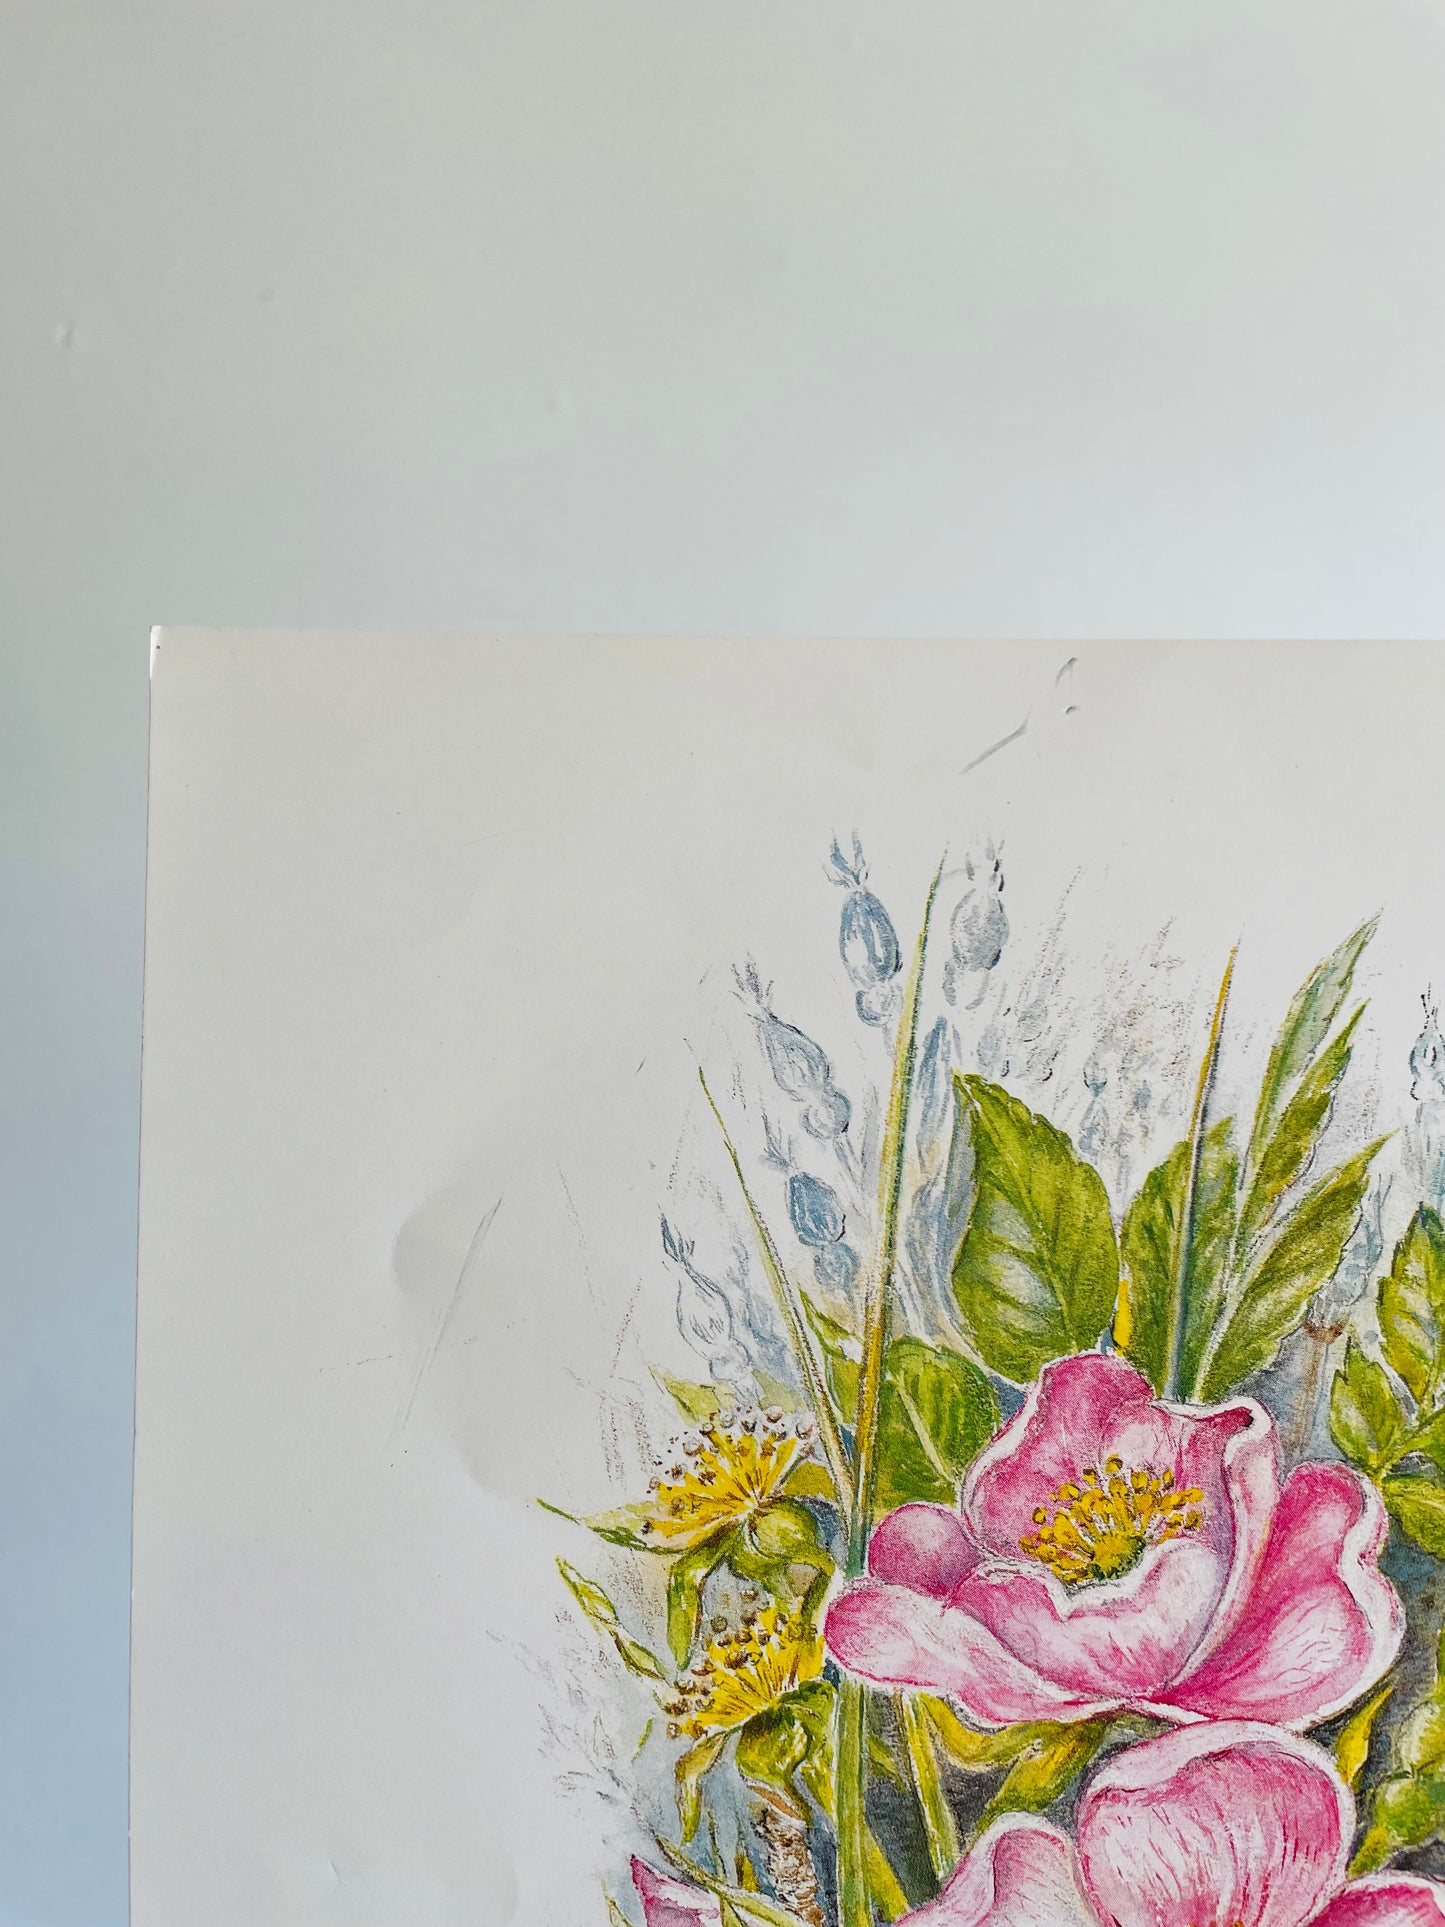 Blush Pink Wild Roses - Floral Lithograph Print Ready for Framing!